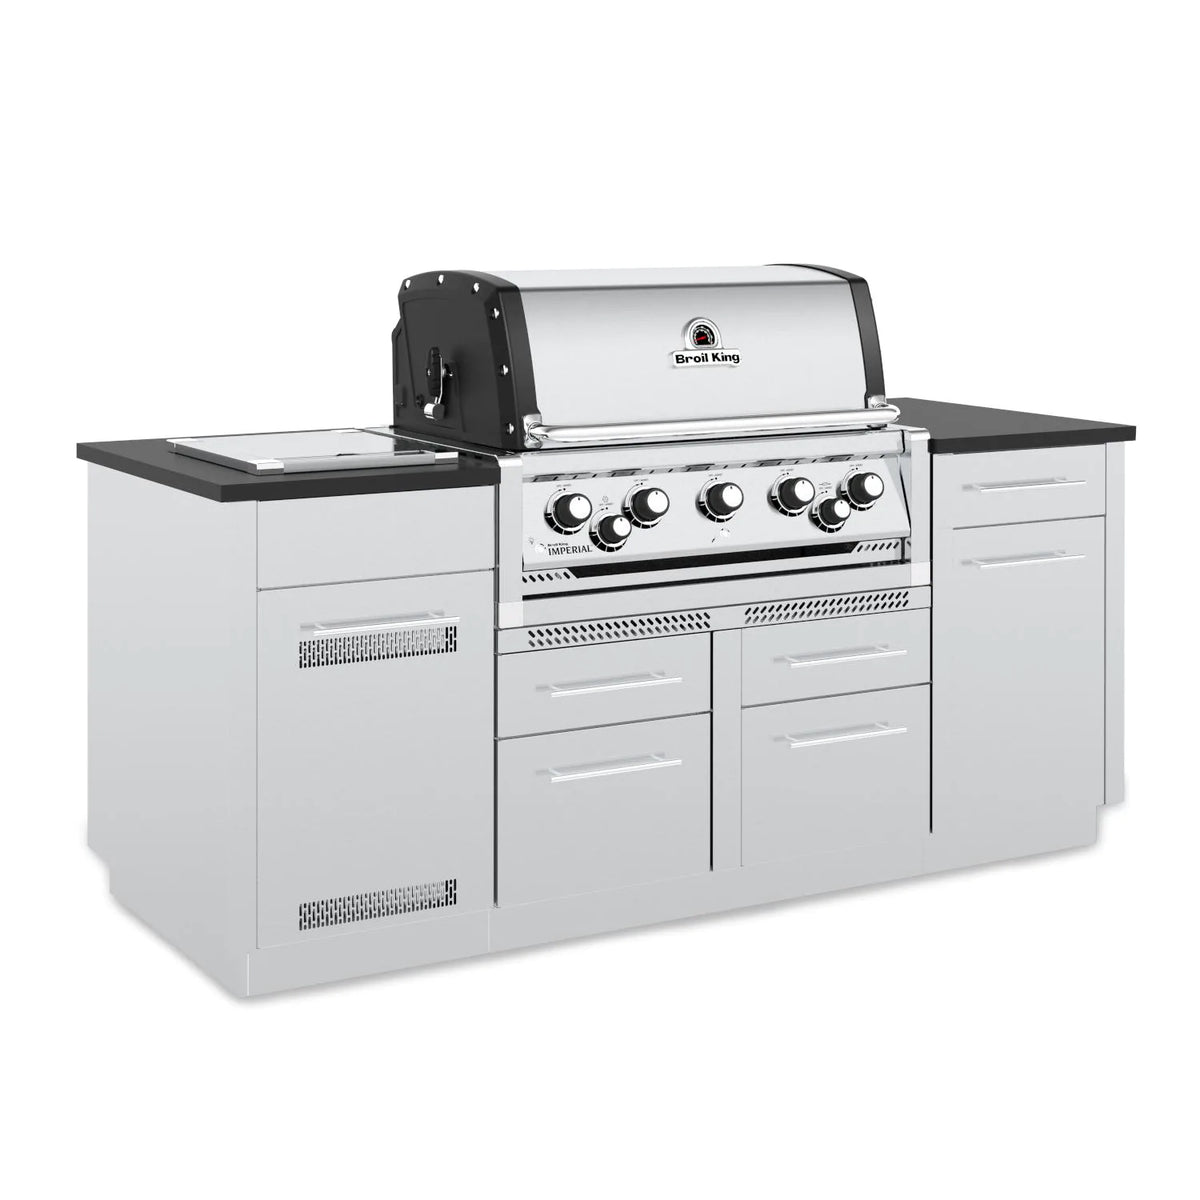 Broil King 896844 Imperial S 590i 5-Burner Propane Gas Grill Center With Rotisserie &amp; Side Burner - Stainless Steel - Side View